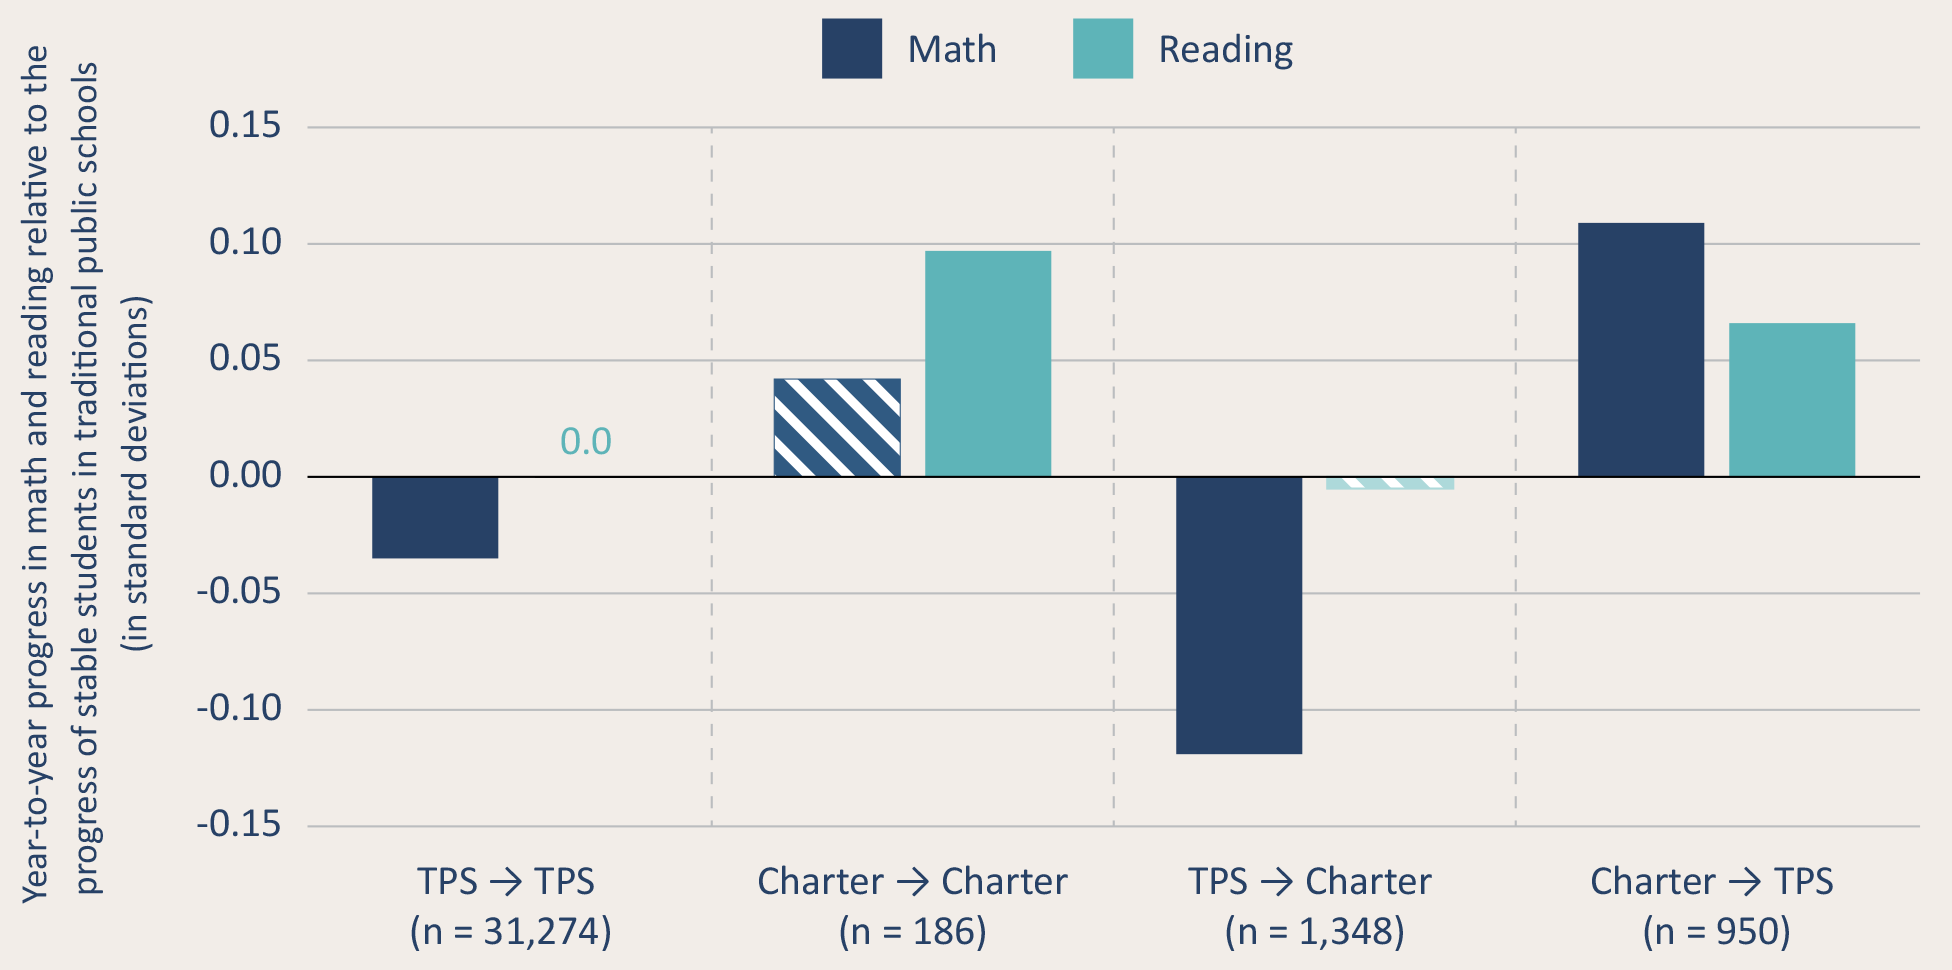 Figure 12. Students who switch from a traditional public school to a charter experience an initial decline in math achievement, while those who switch from a charter to a traditional public school make faster progress in both math and reading.